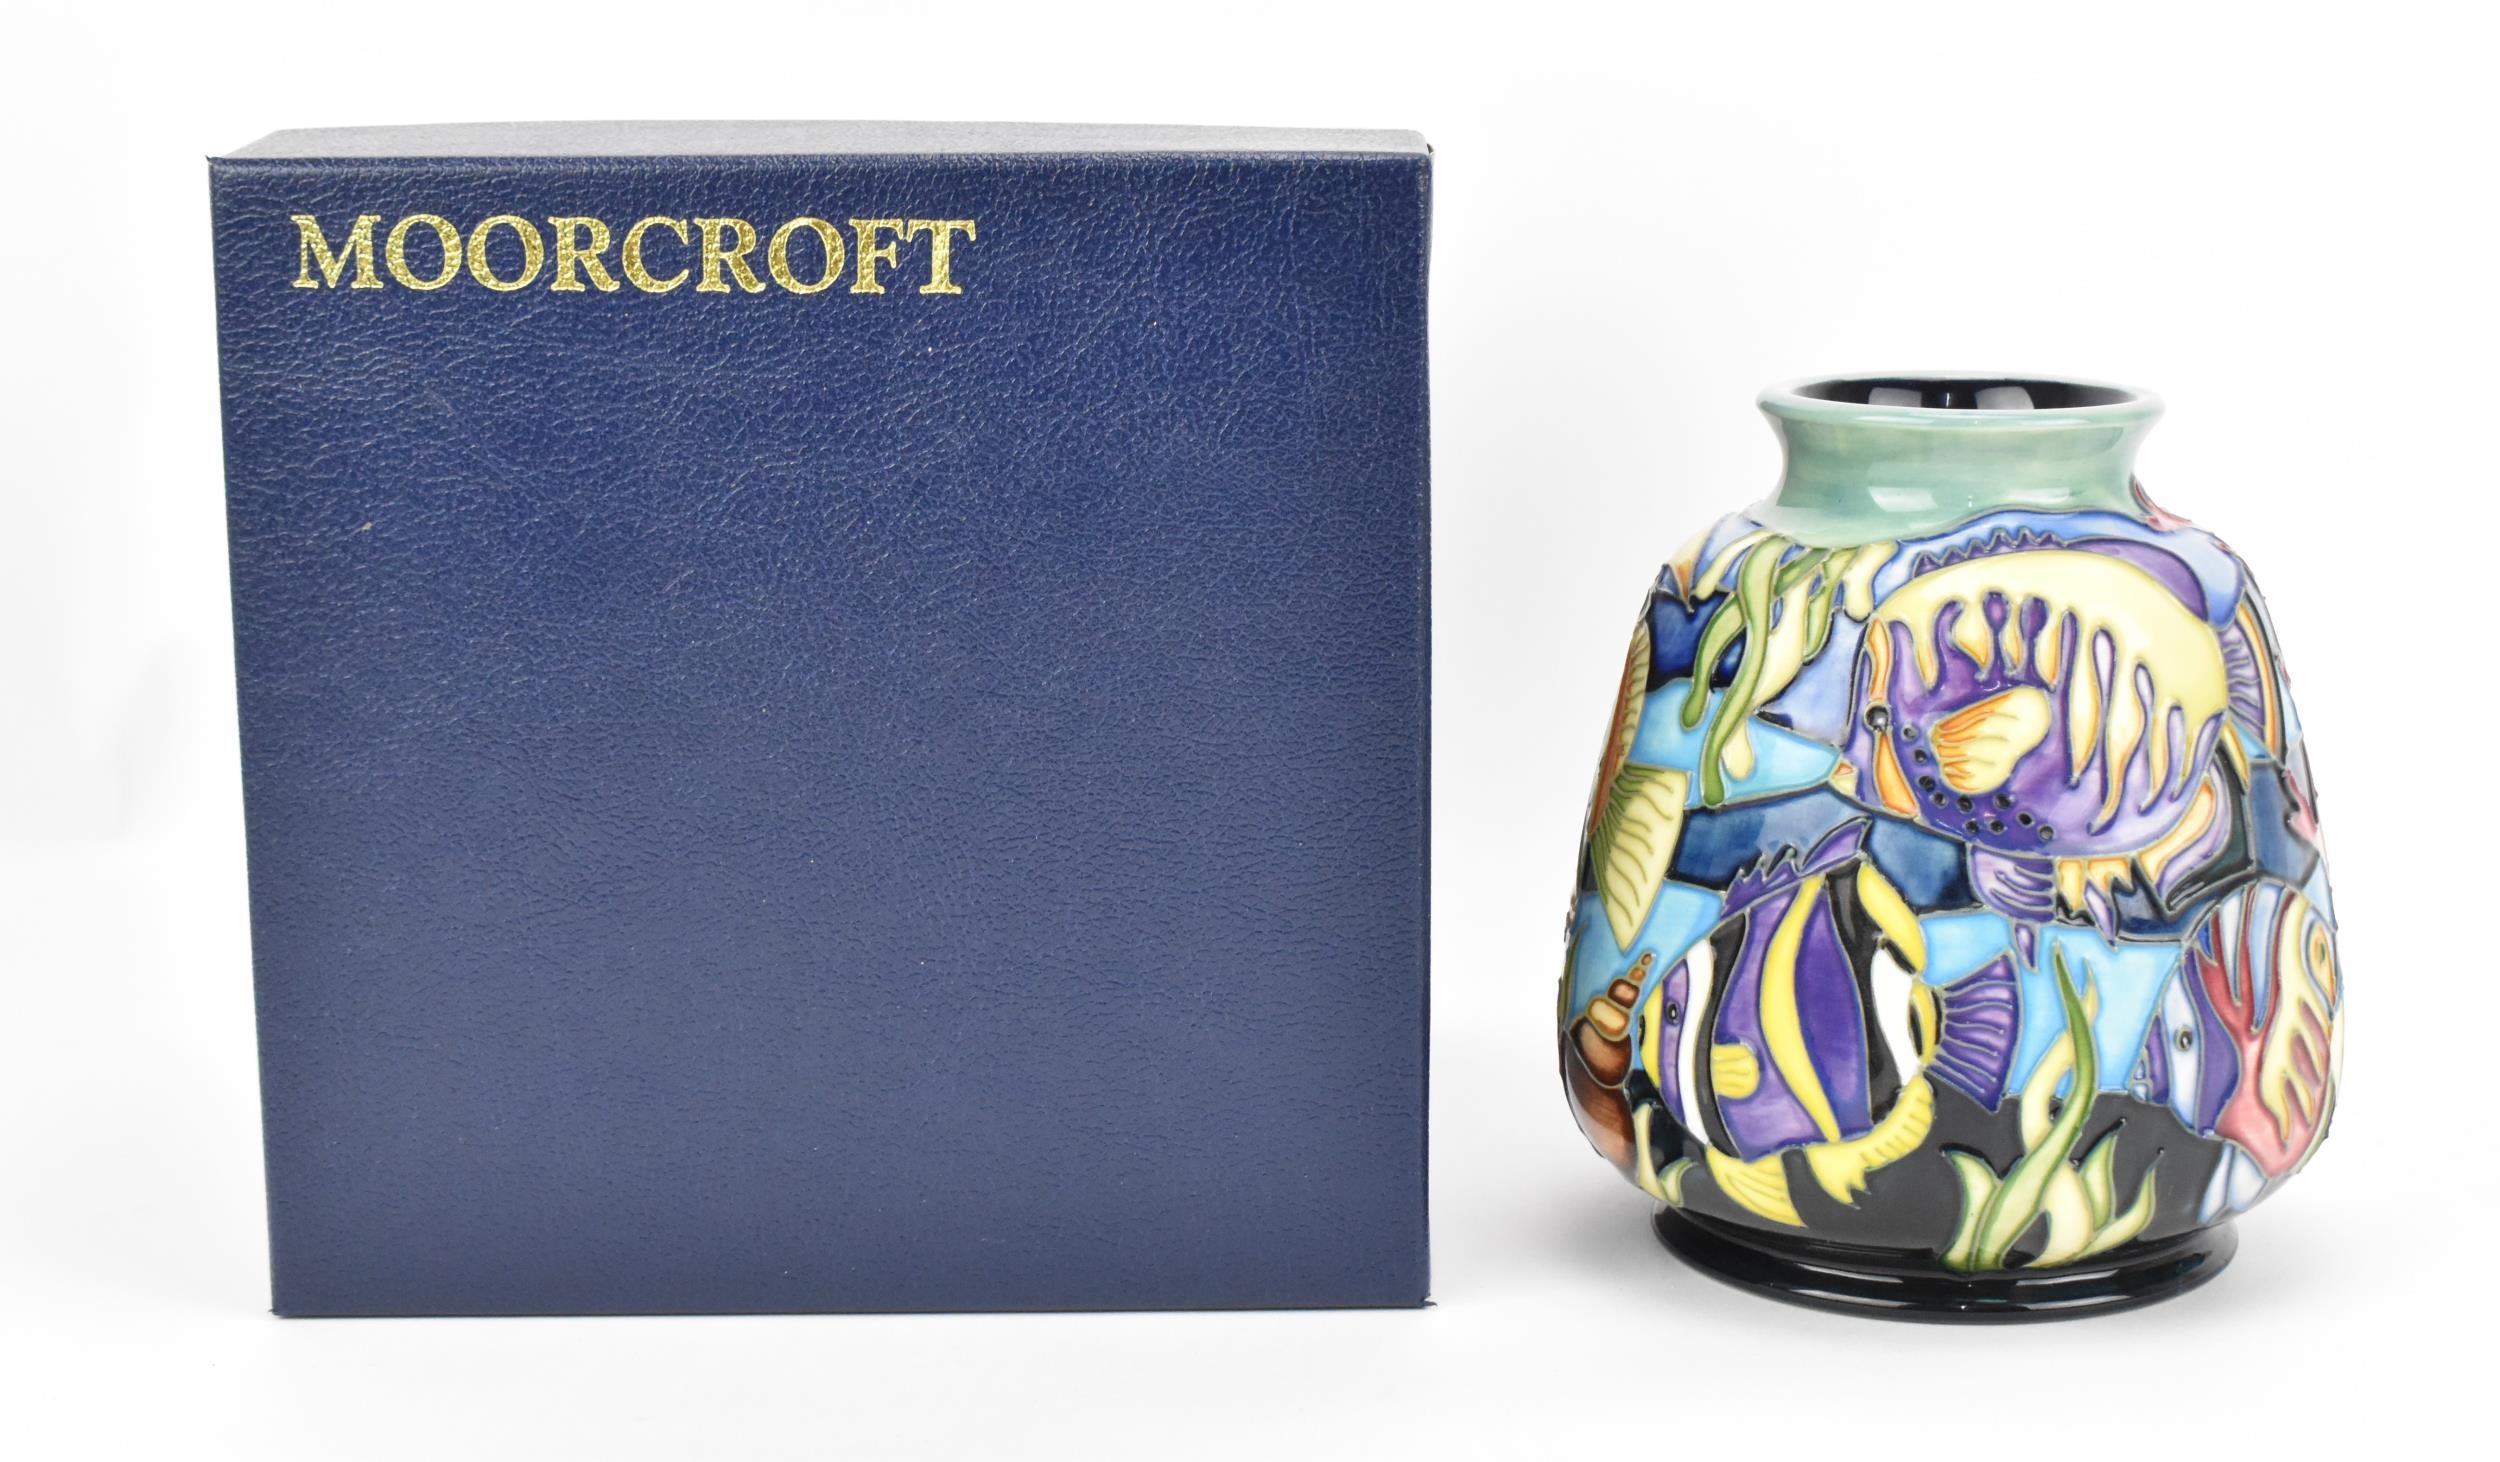 A Moorcroft Pottery vase in the 'Martinique' design by Jeanne McDougall, depicting coral reef